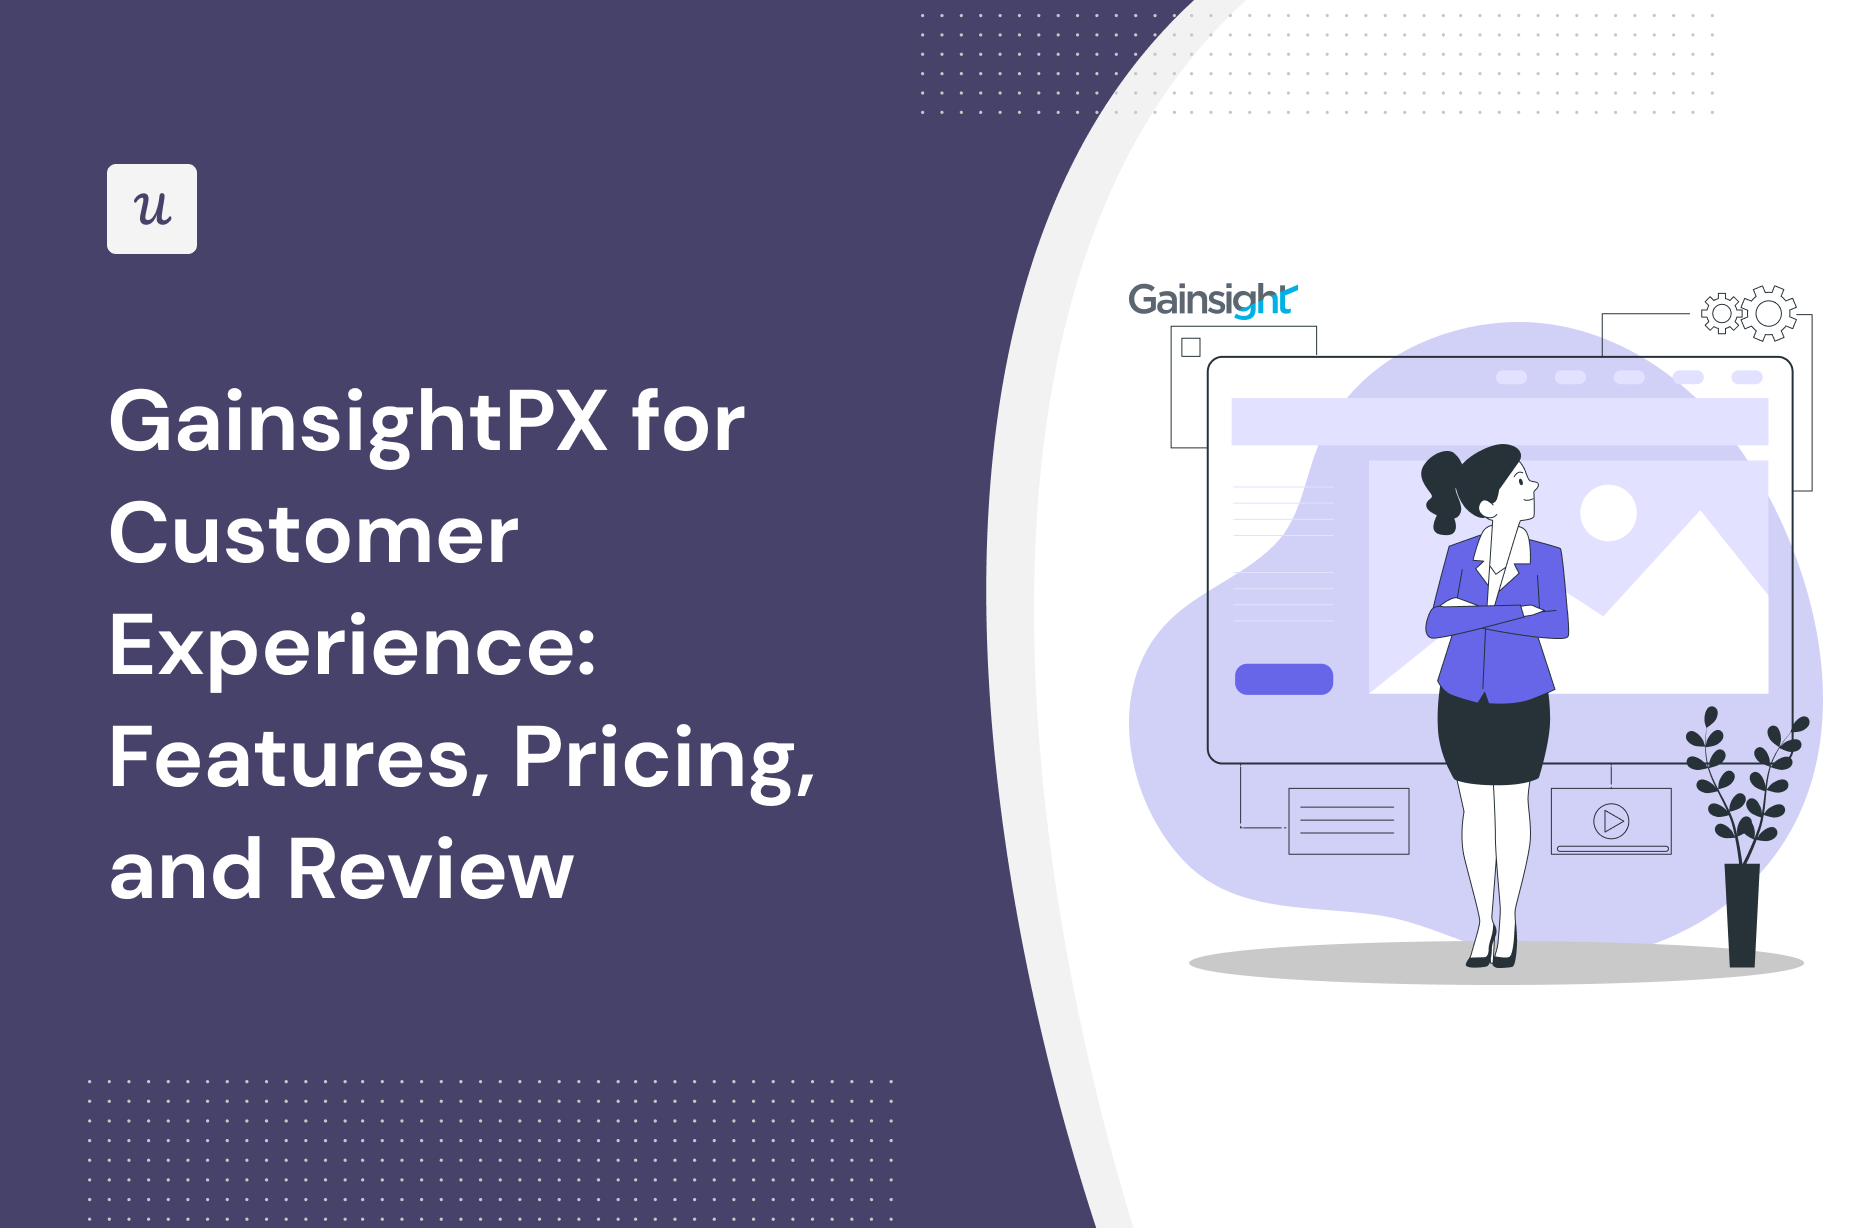 GainsightPX for Customer Experience: Features, Pricing, and Review